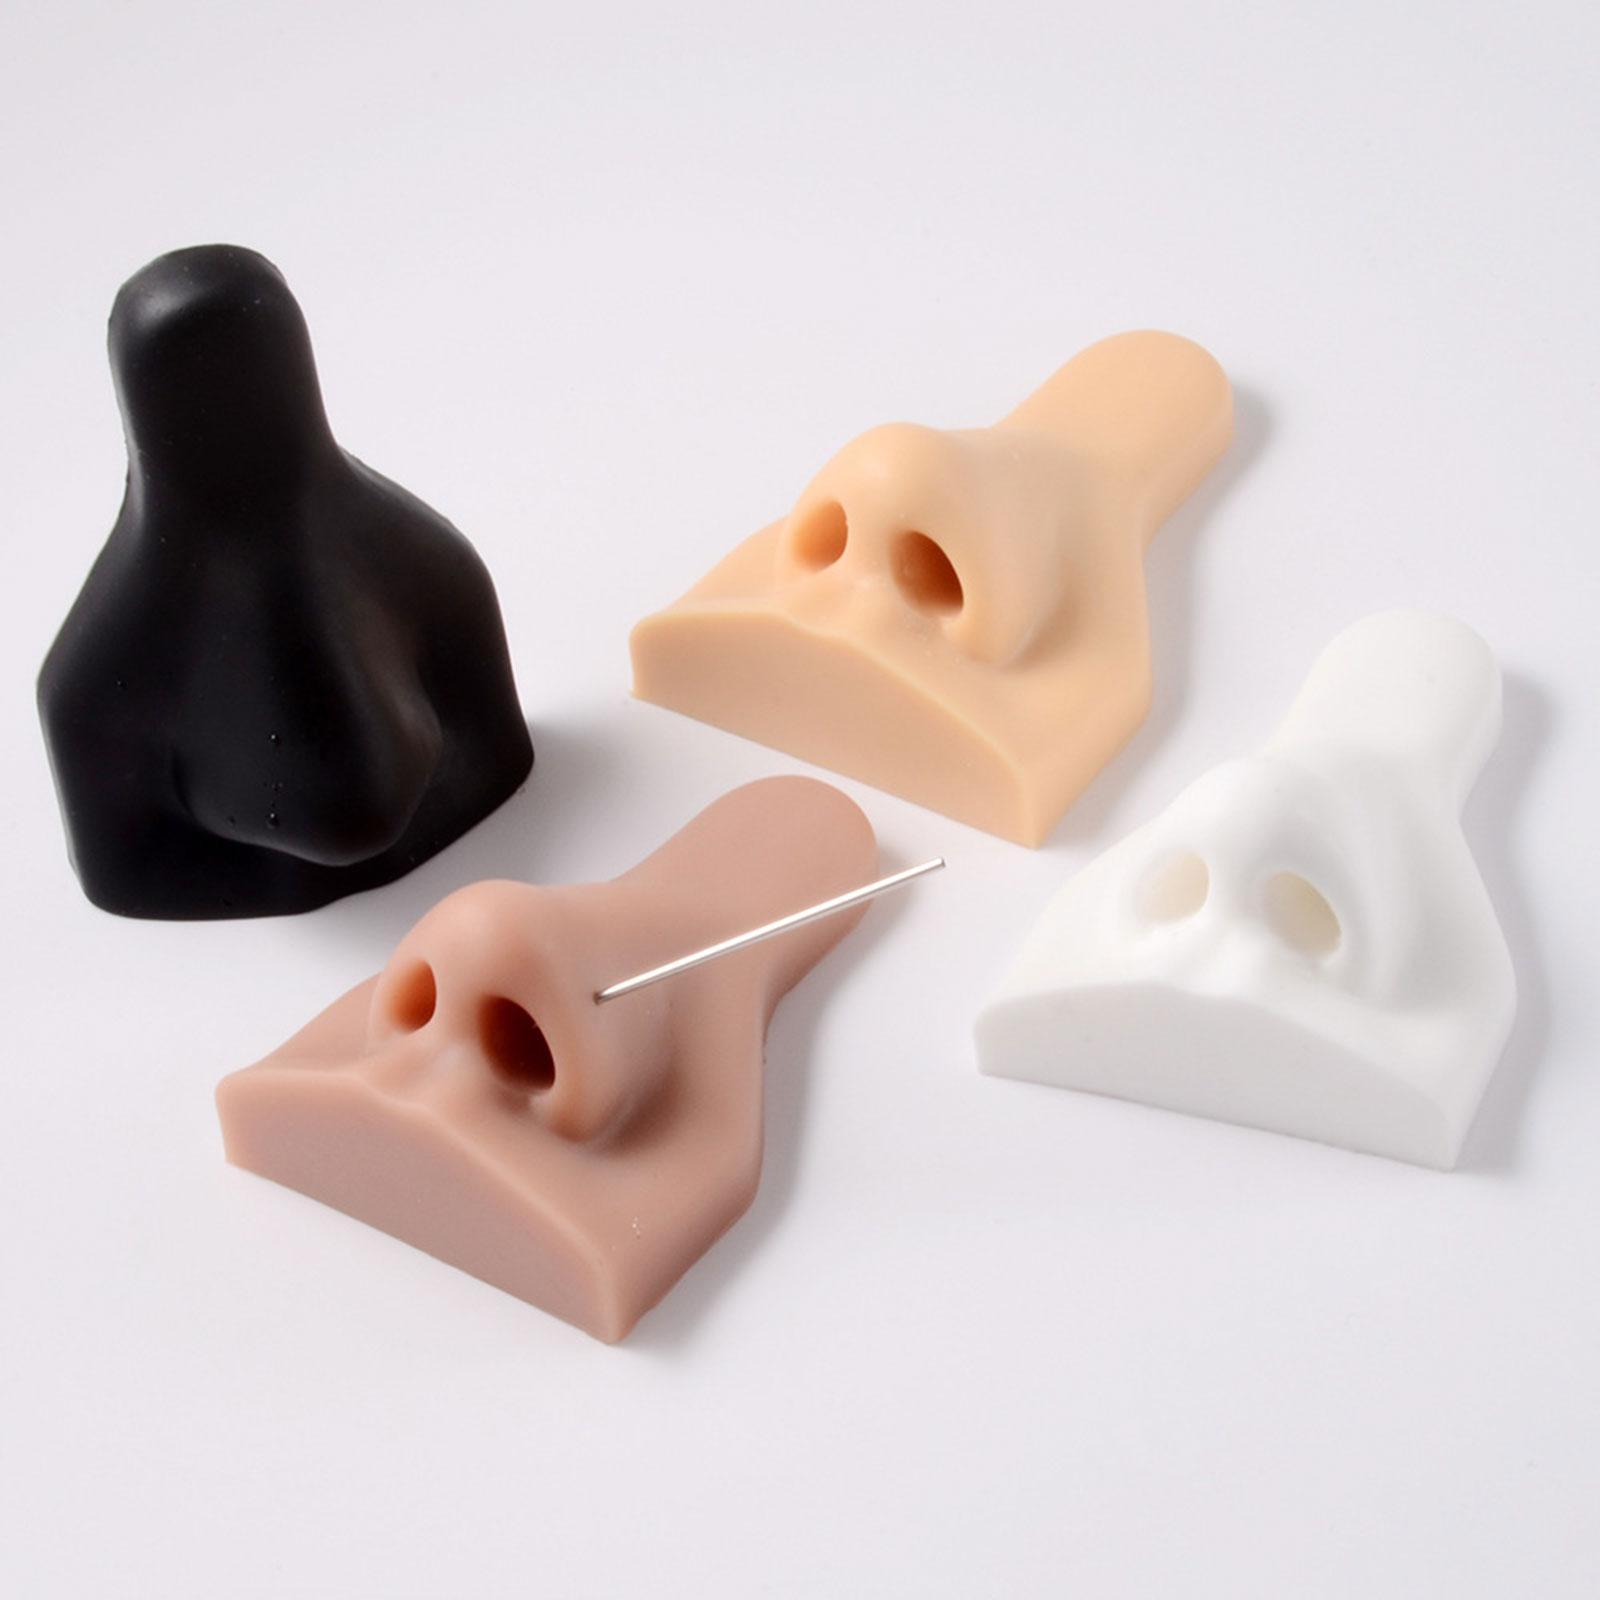 Silicone Nose Model Flexible Body Display Props for Practice Teaching Instructions